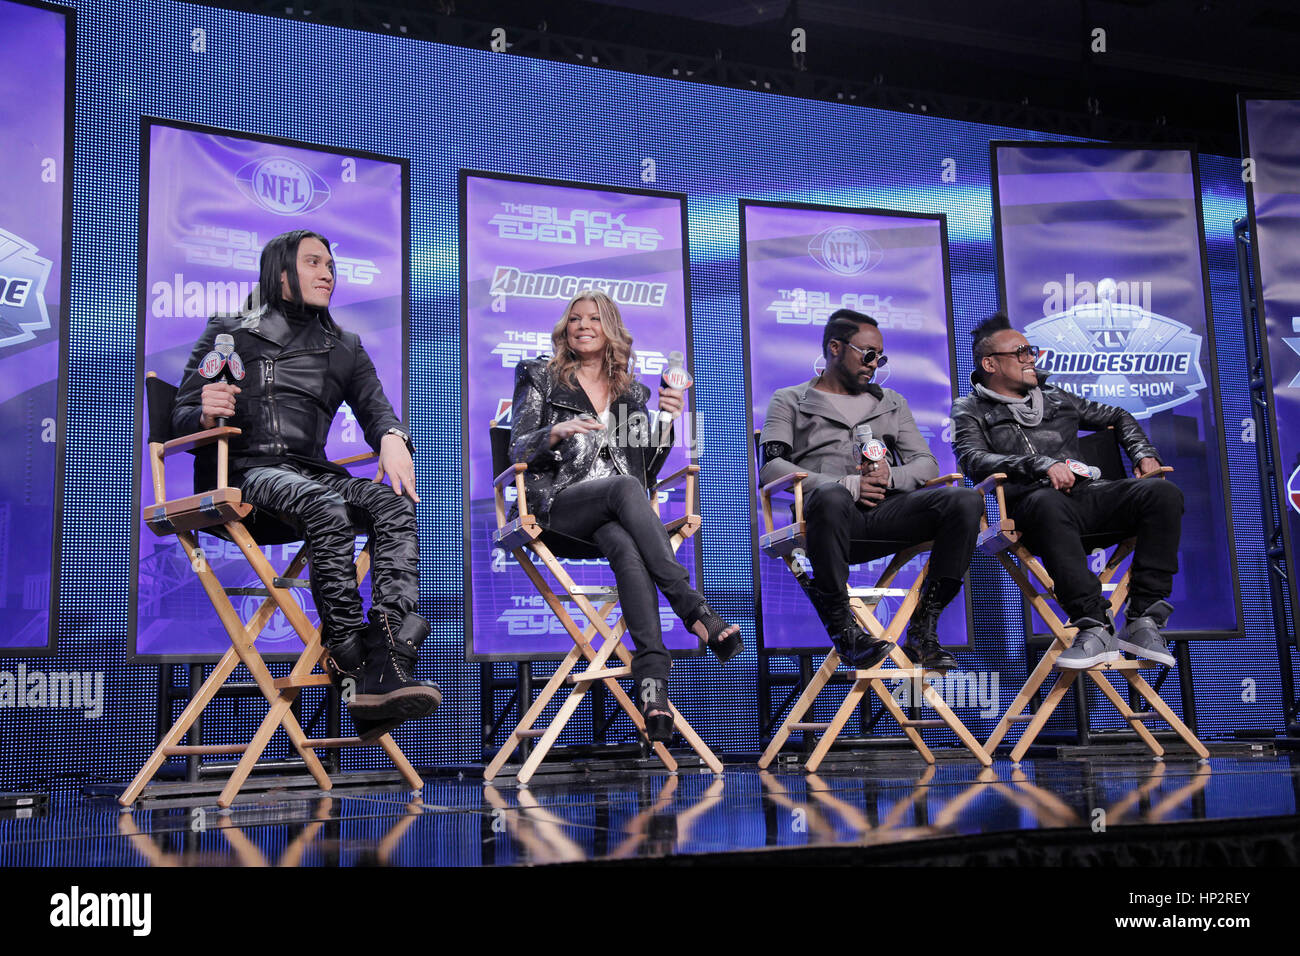 The Black Eyed Peas, from left, Taboo, Fergie, Will.i.am, and apl.de.ap at a press conference for the half-time show for Super Bowl 45 on February 3, 2011 in Dallas, Texas. Photo by Francis Specker Stock Photo